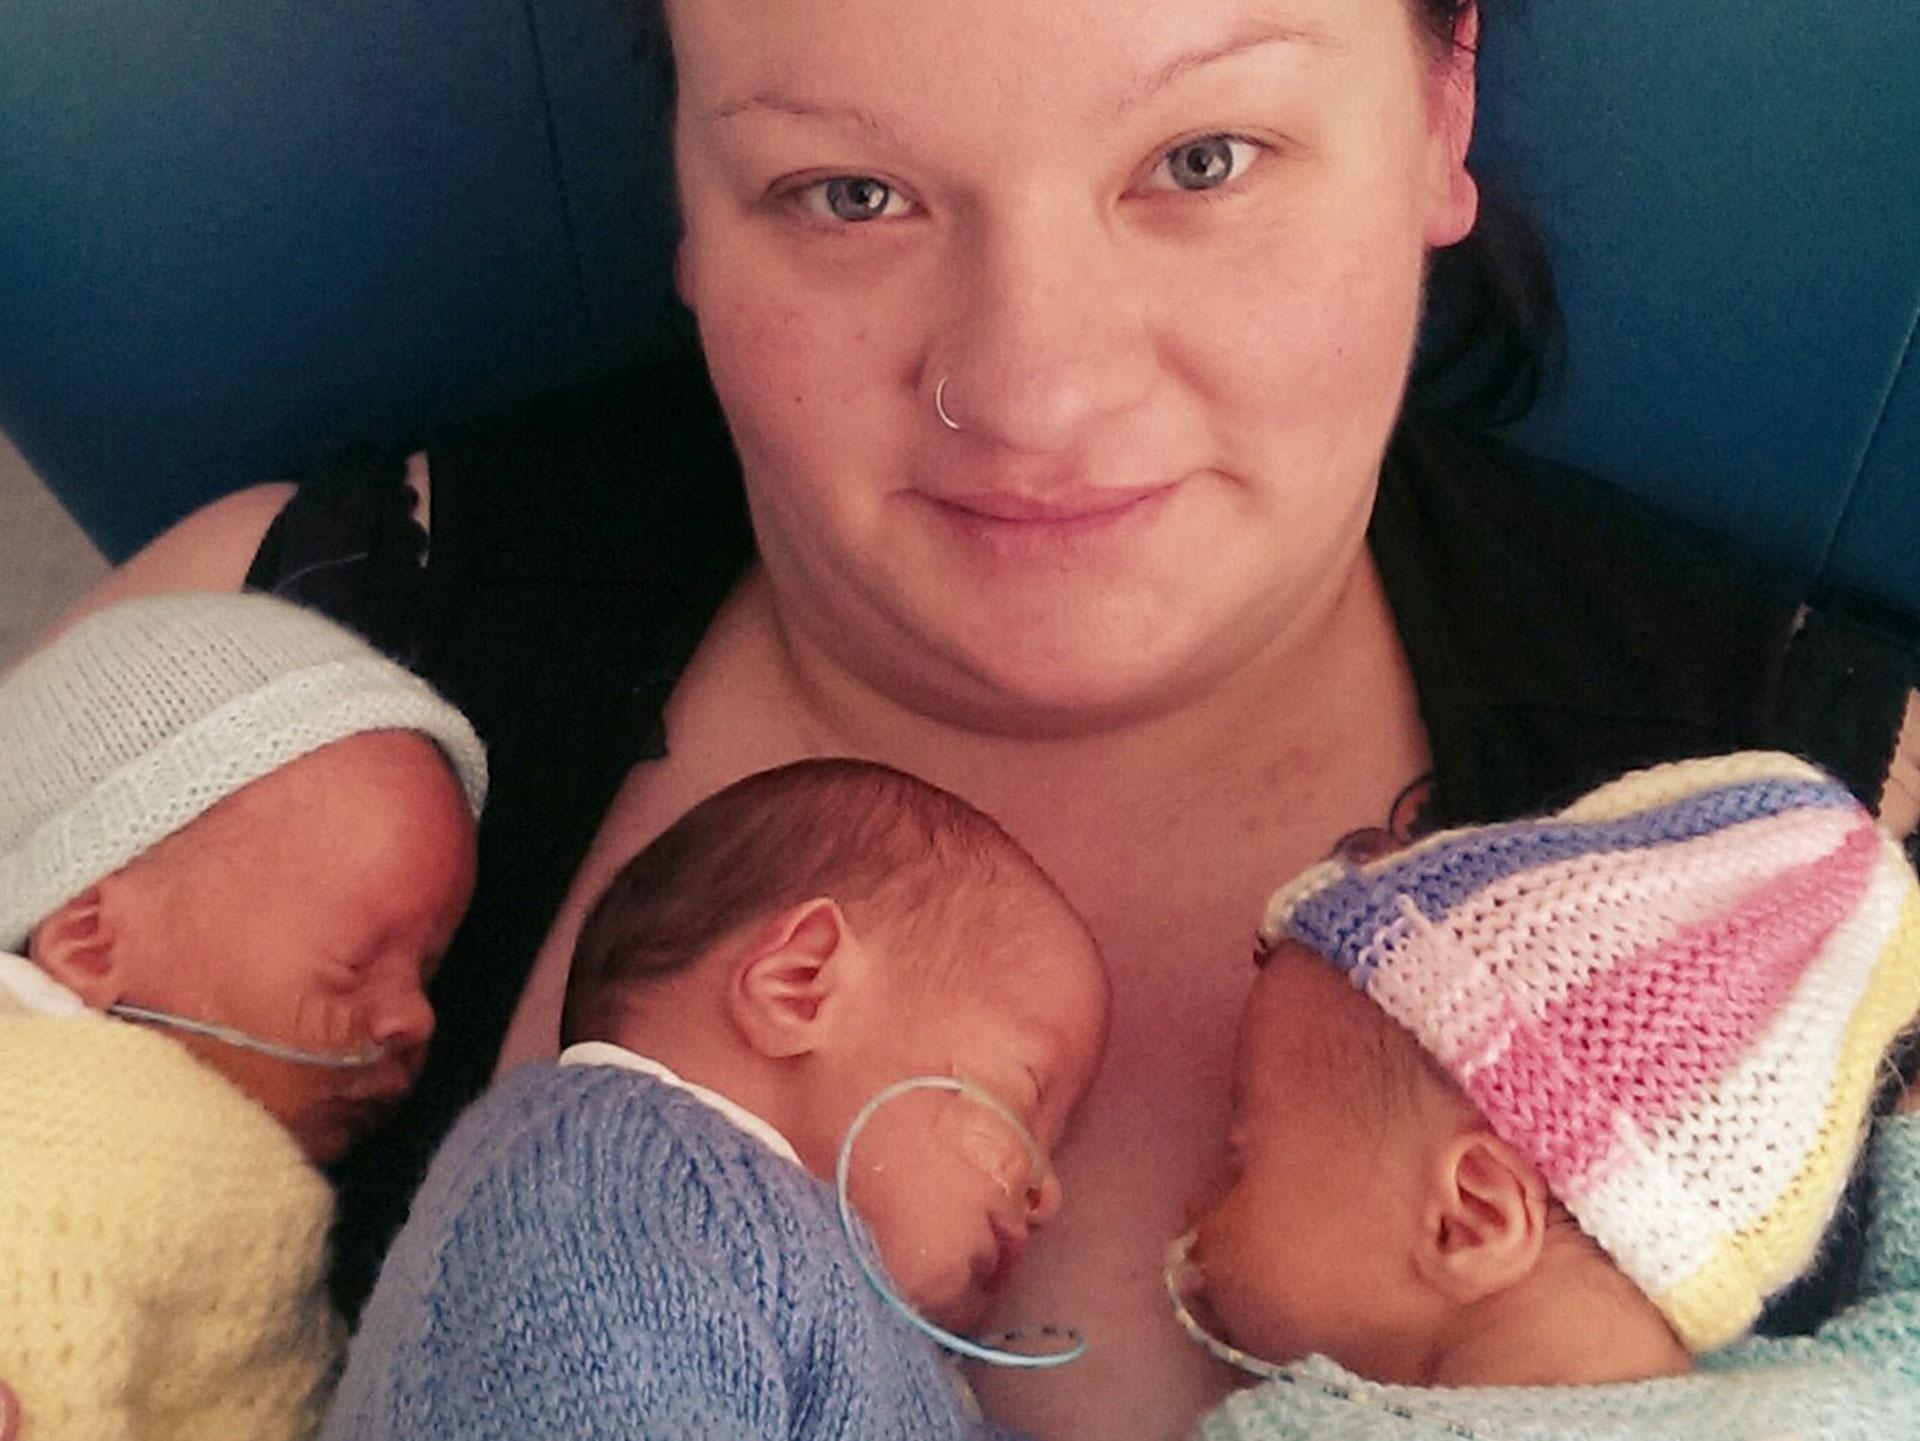 Doctors said I was too fat for triplets